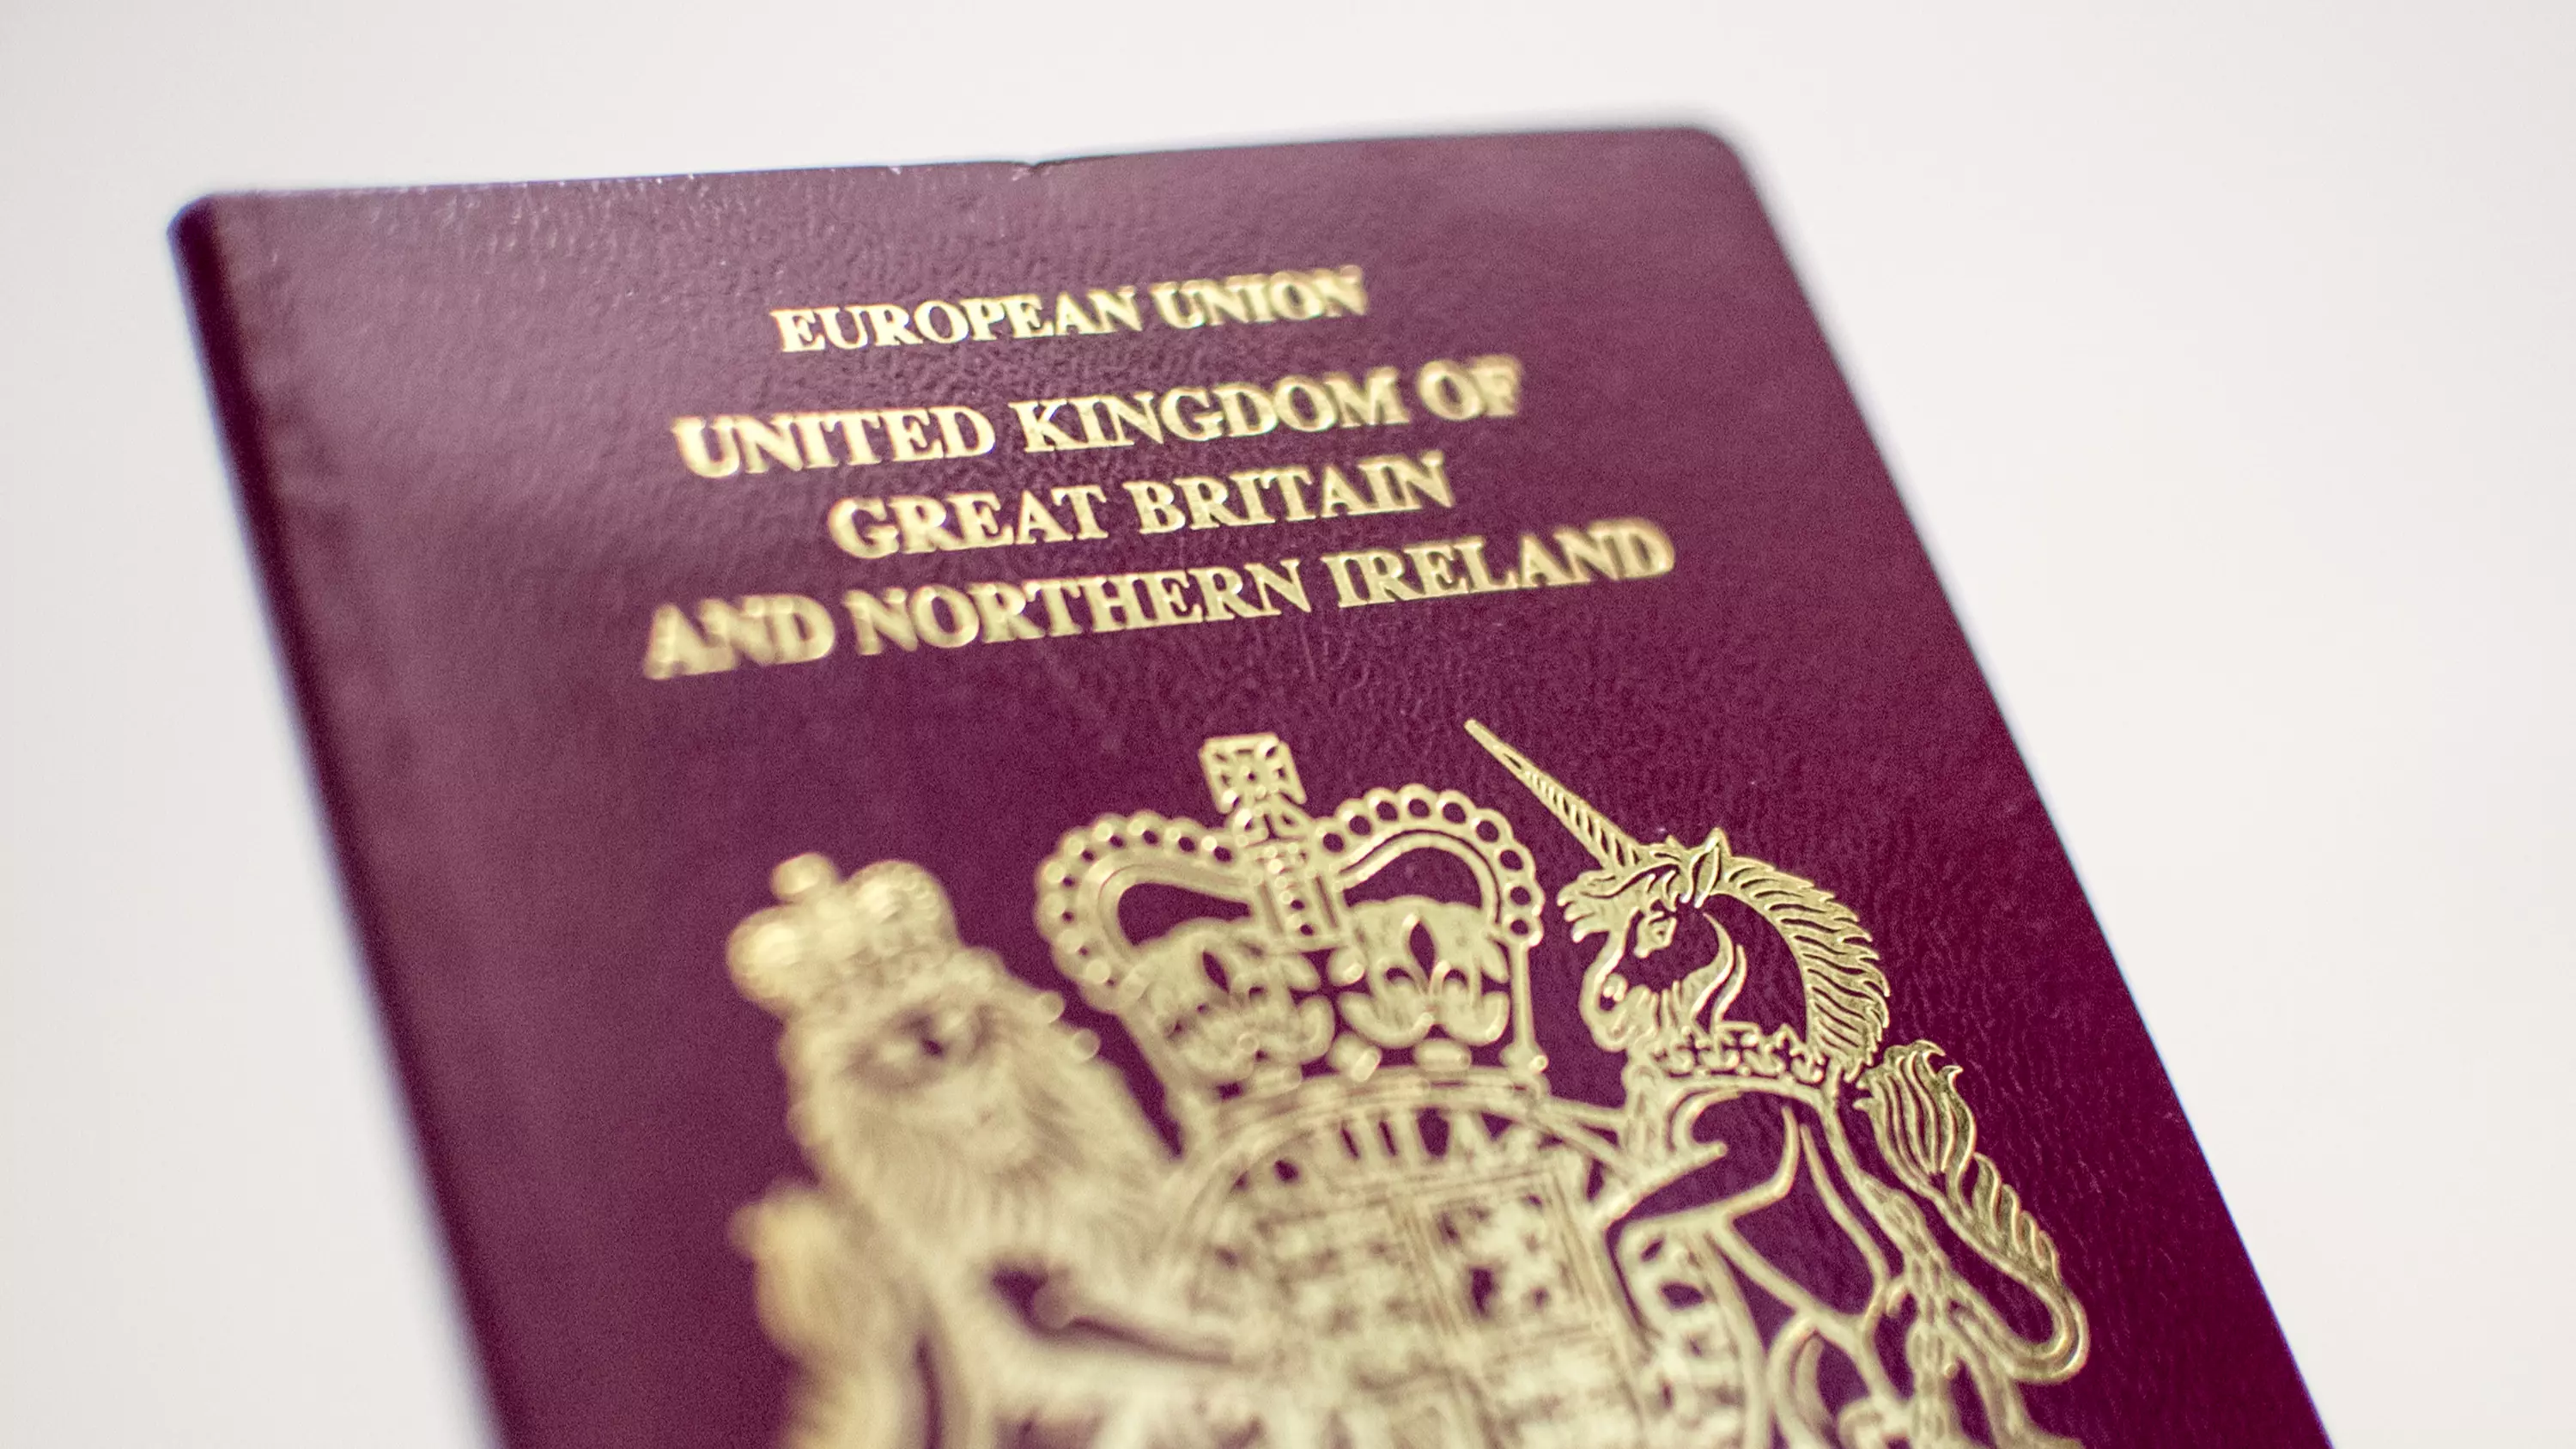 Home Office Wants Brits To Renew Passports Before November